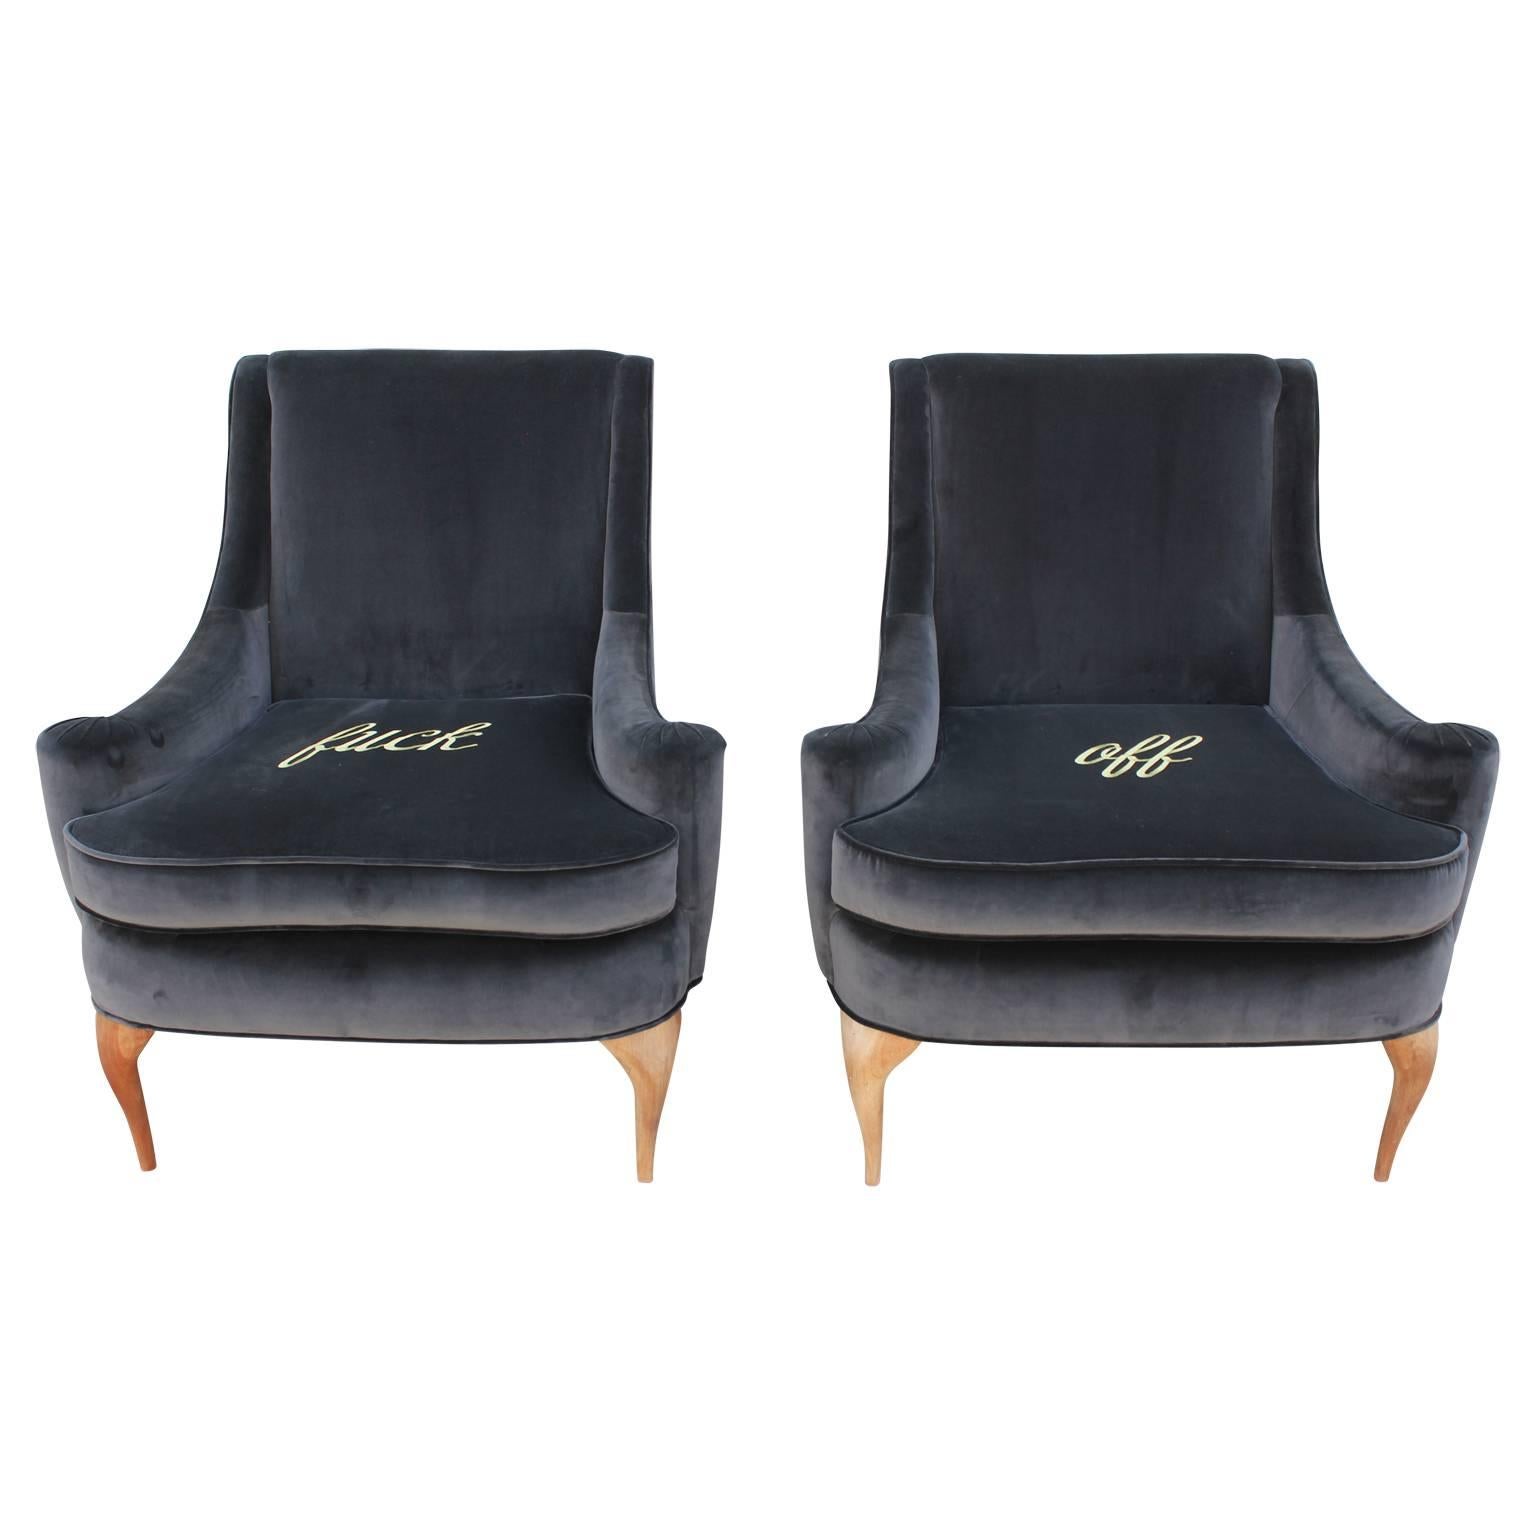 Stunning statement lounge chairs custom upholstered and embroidered with the words 